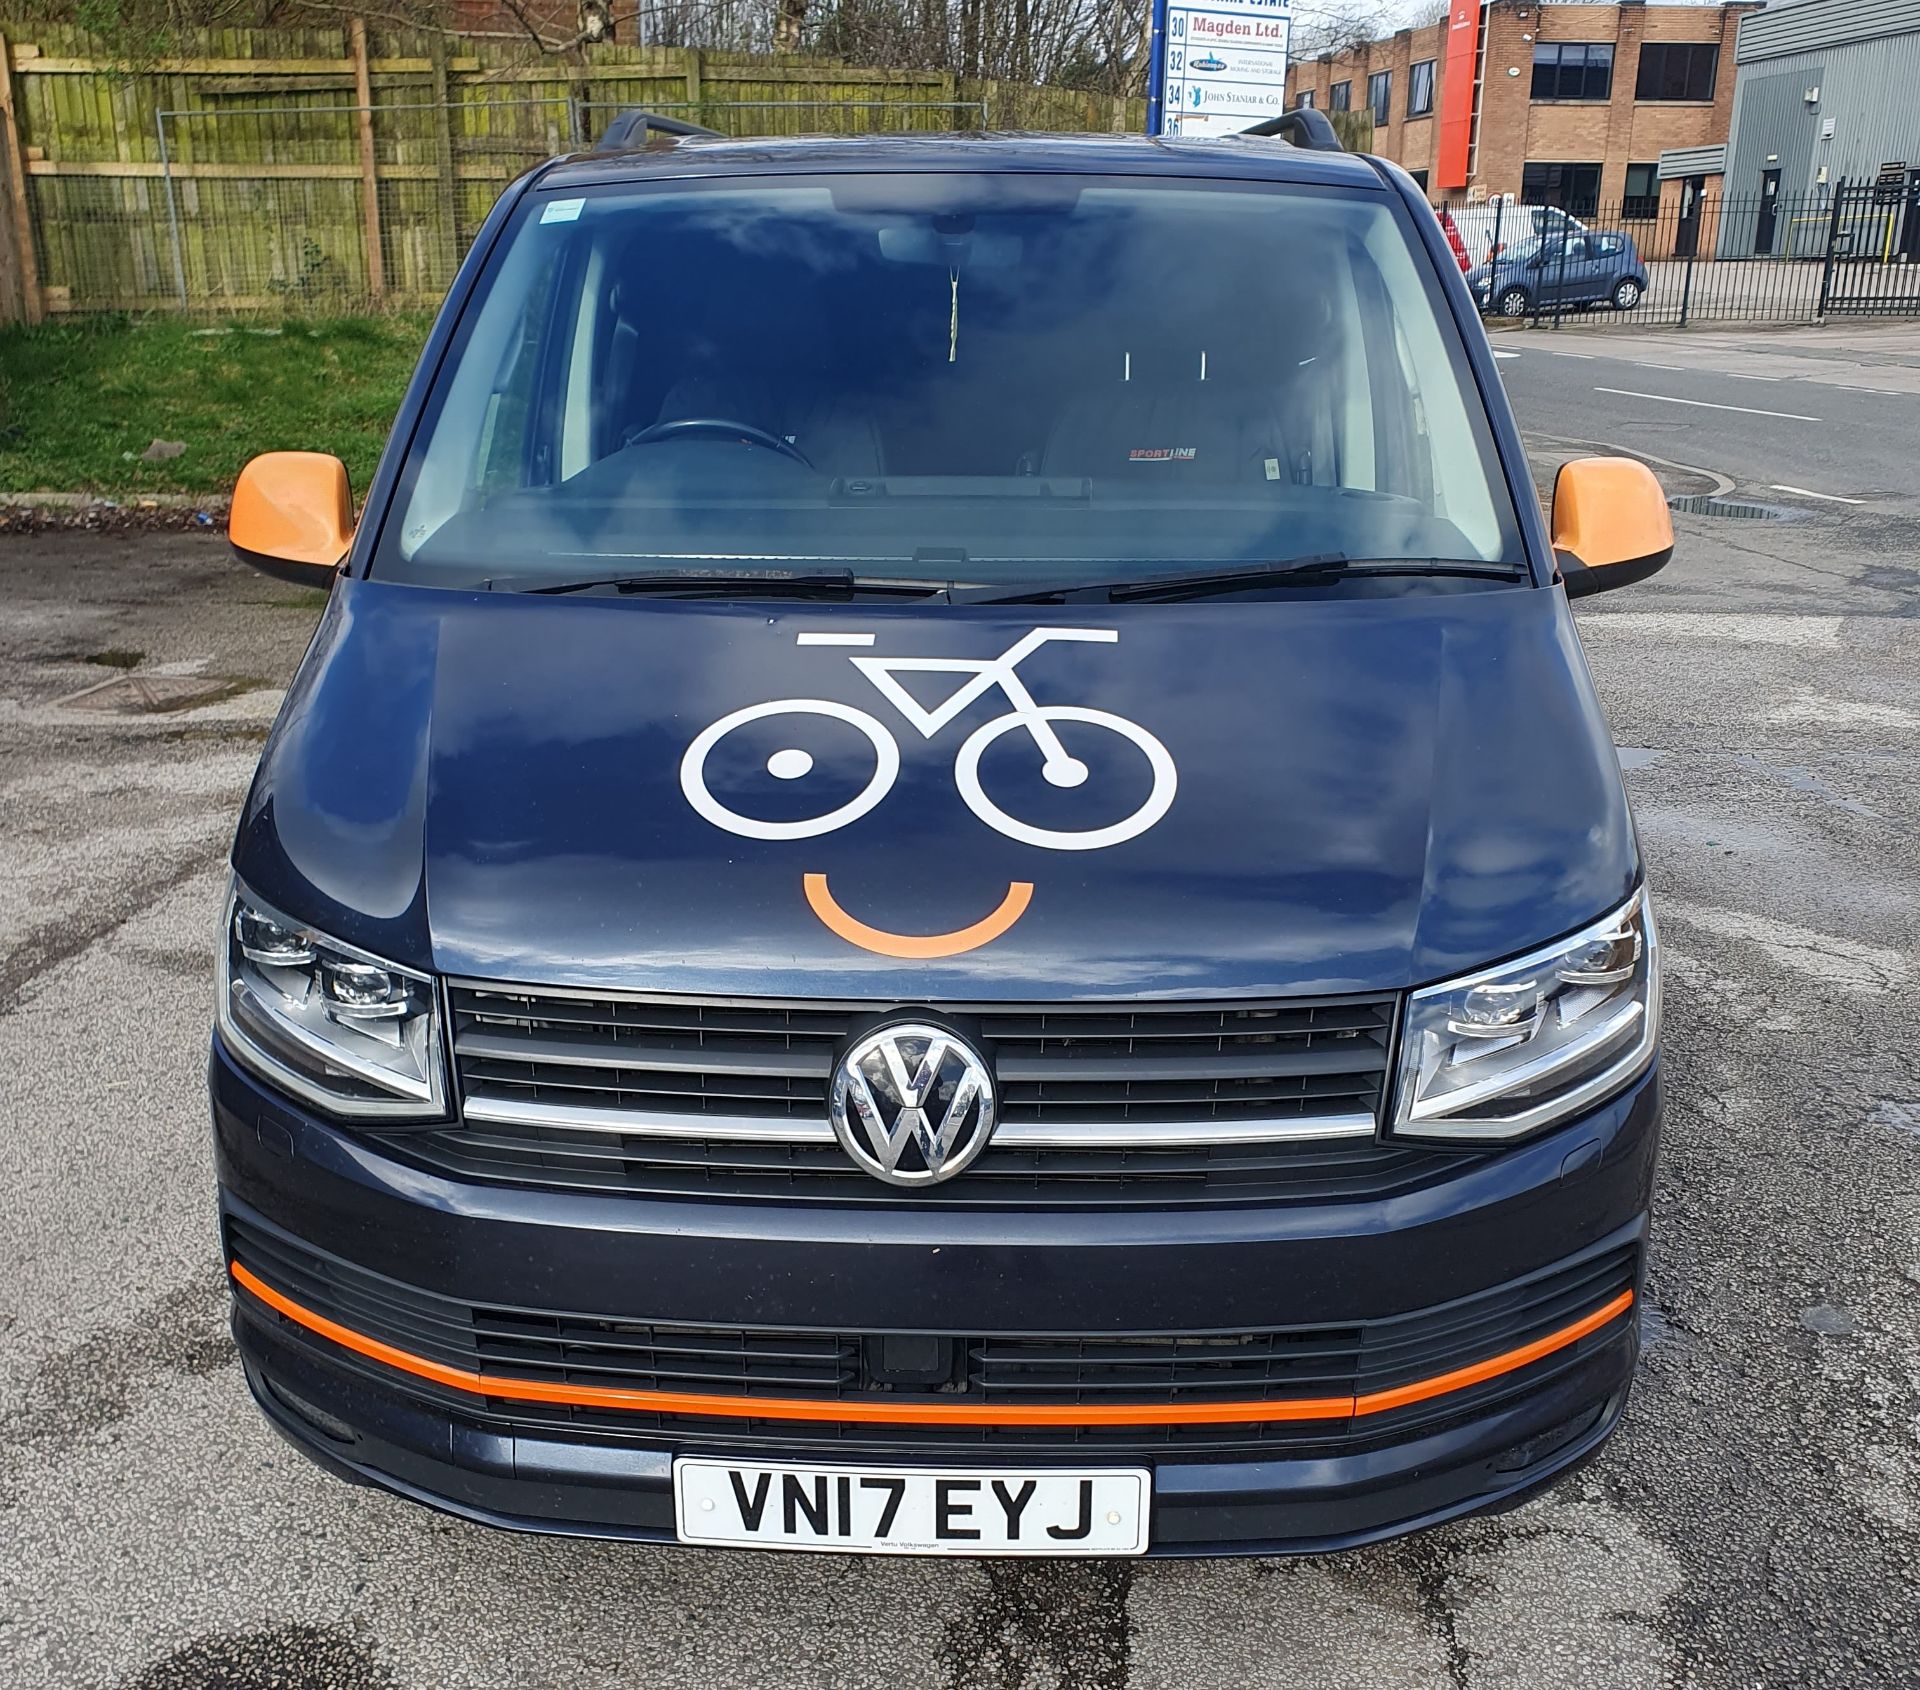 Volkswagen Transporter T32 H-LN | VN17 EYJ | Blue | Automatic | 77,149 Miles - Image 2 of 20